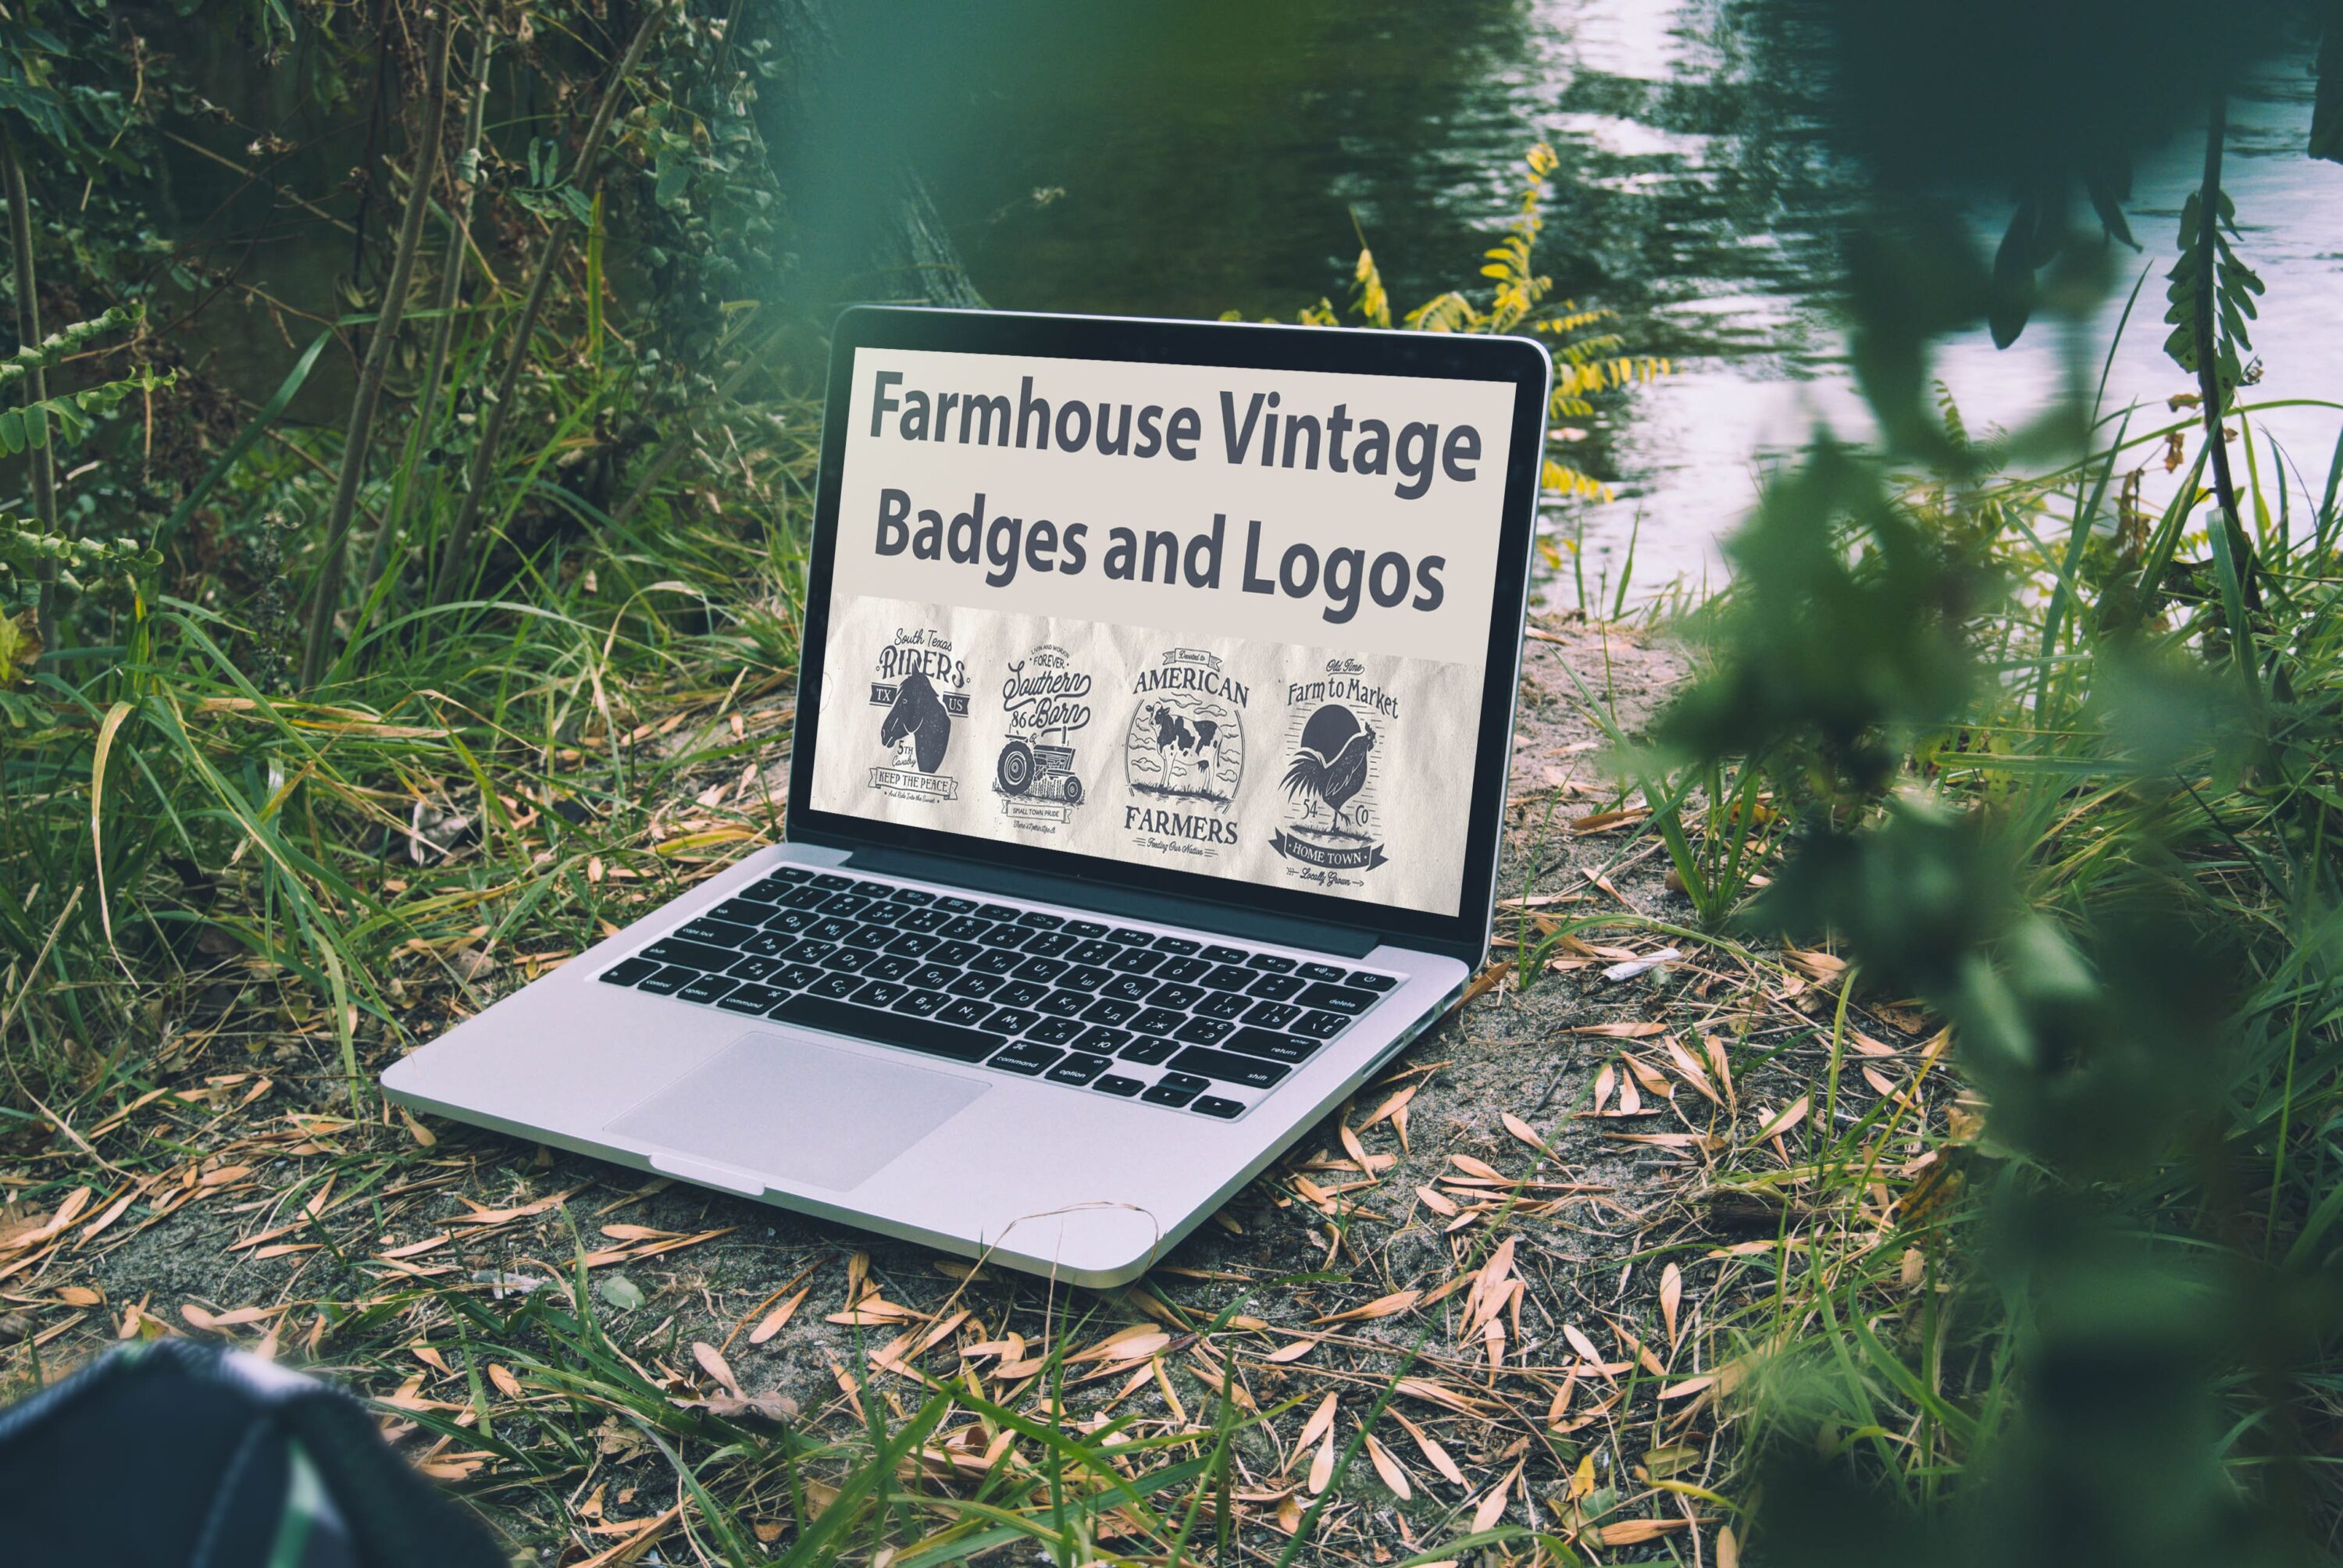 Laptop option of the Farmhouse Vintage Badges and Logos.